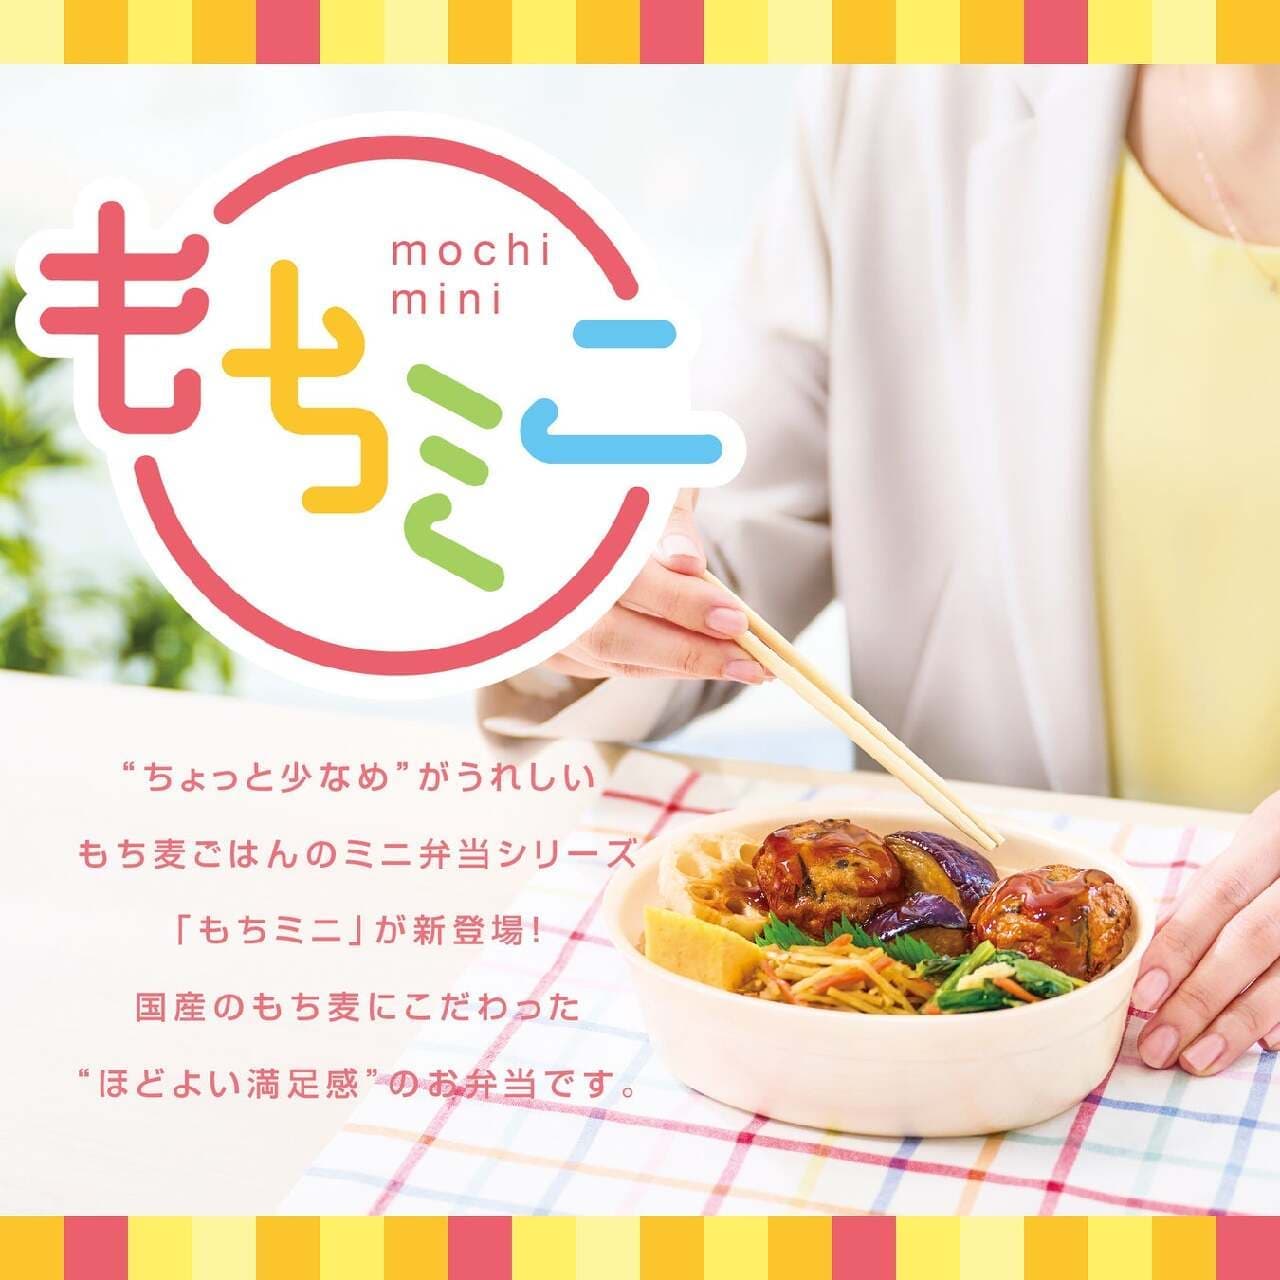 Hotto Motto" will launch a new boxed lunch series "Mochi Mini" containing glutinous barley nationwide on May 15! Fluffy Tofu Hamburger Steak, Cut Steak, and Shaké Lunchboxes Offer Satisfying Meals Image 1